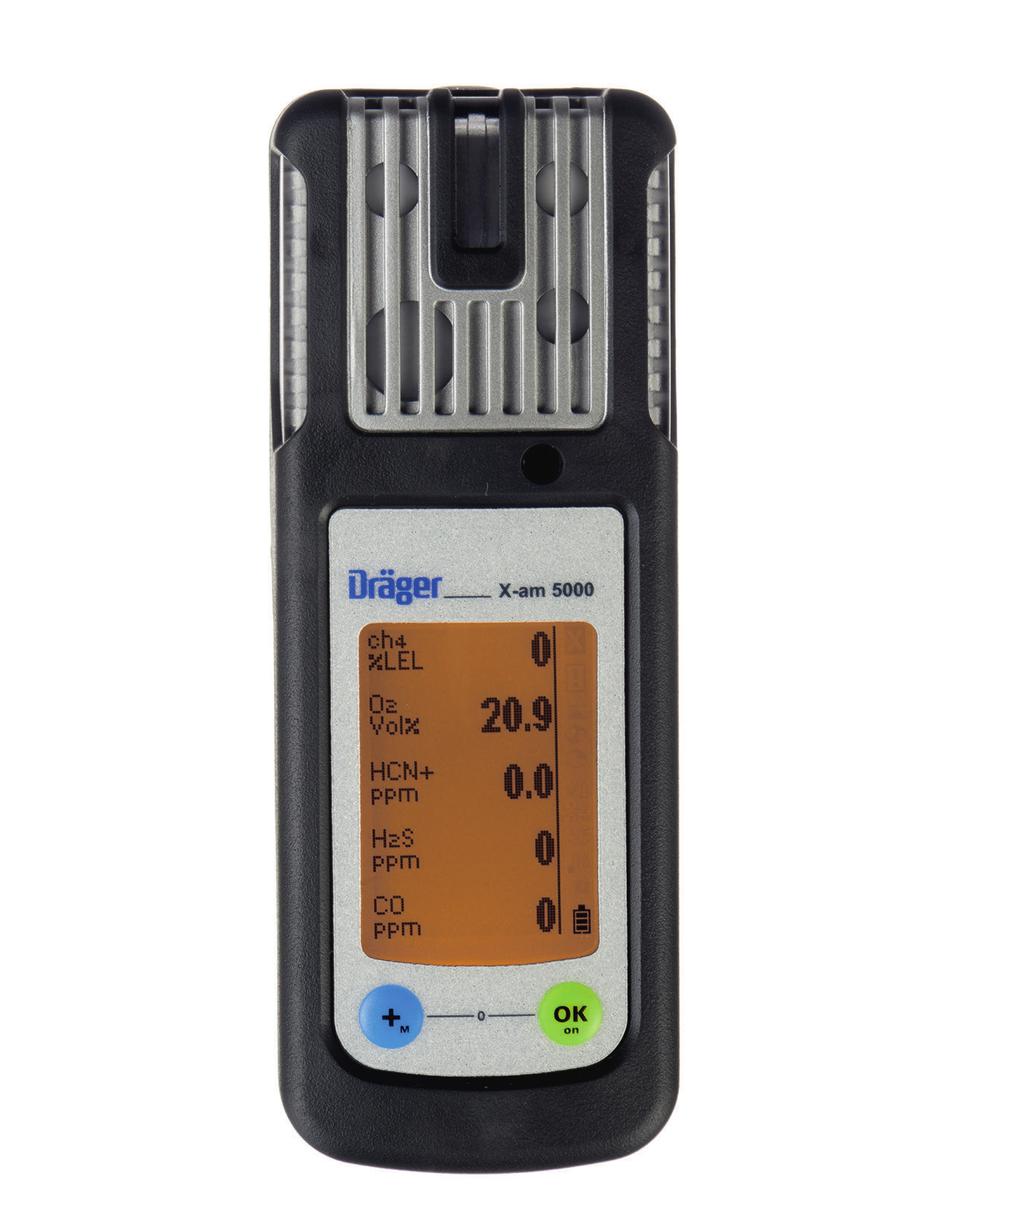 Dräger X-am 5000 Multi-Gas Detector The Dräger X-am 5000 belongs to a generation of gas detectors, developed especially for personal monitoring applications.